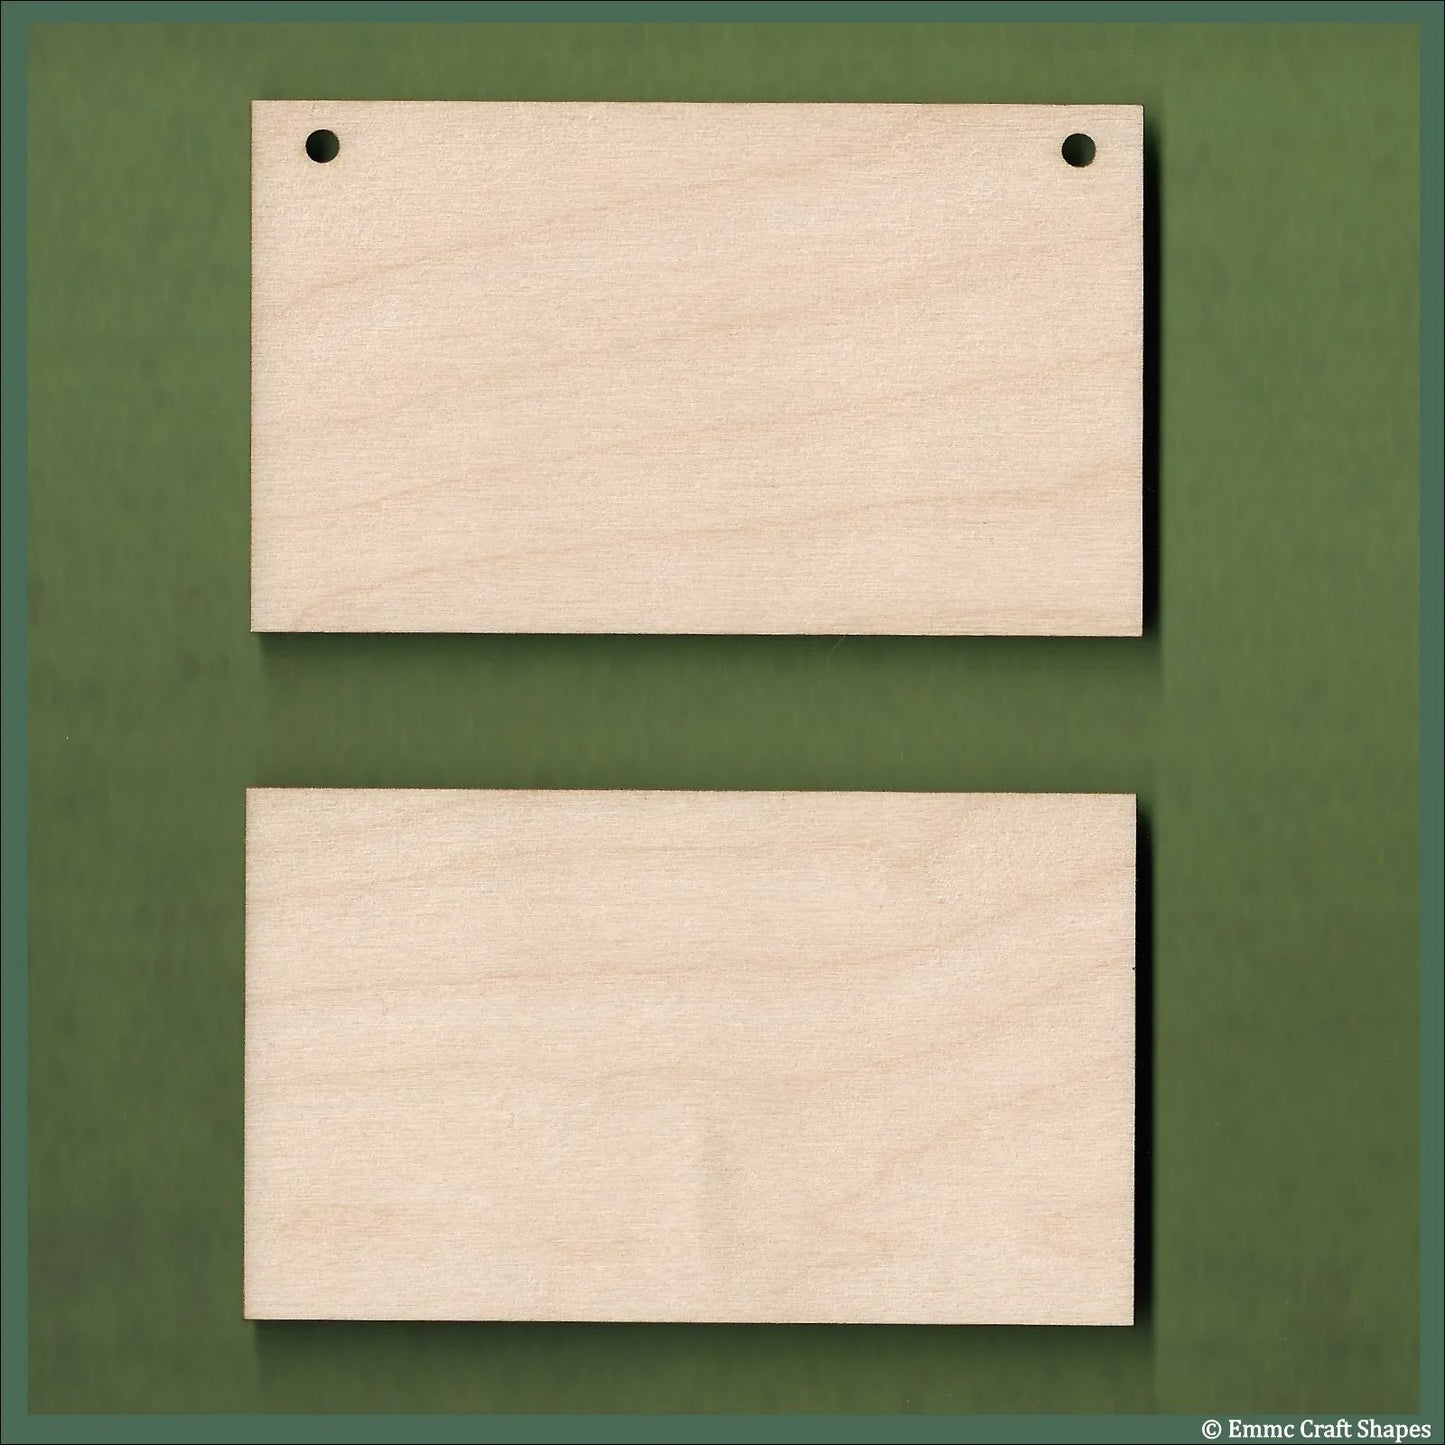 10 cm Wide Blank board plaques with square corners - plywood